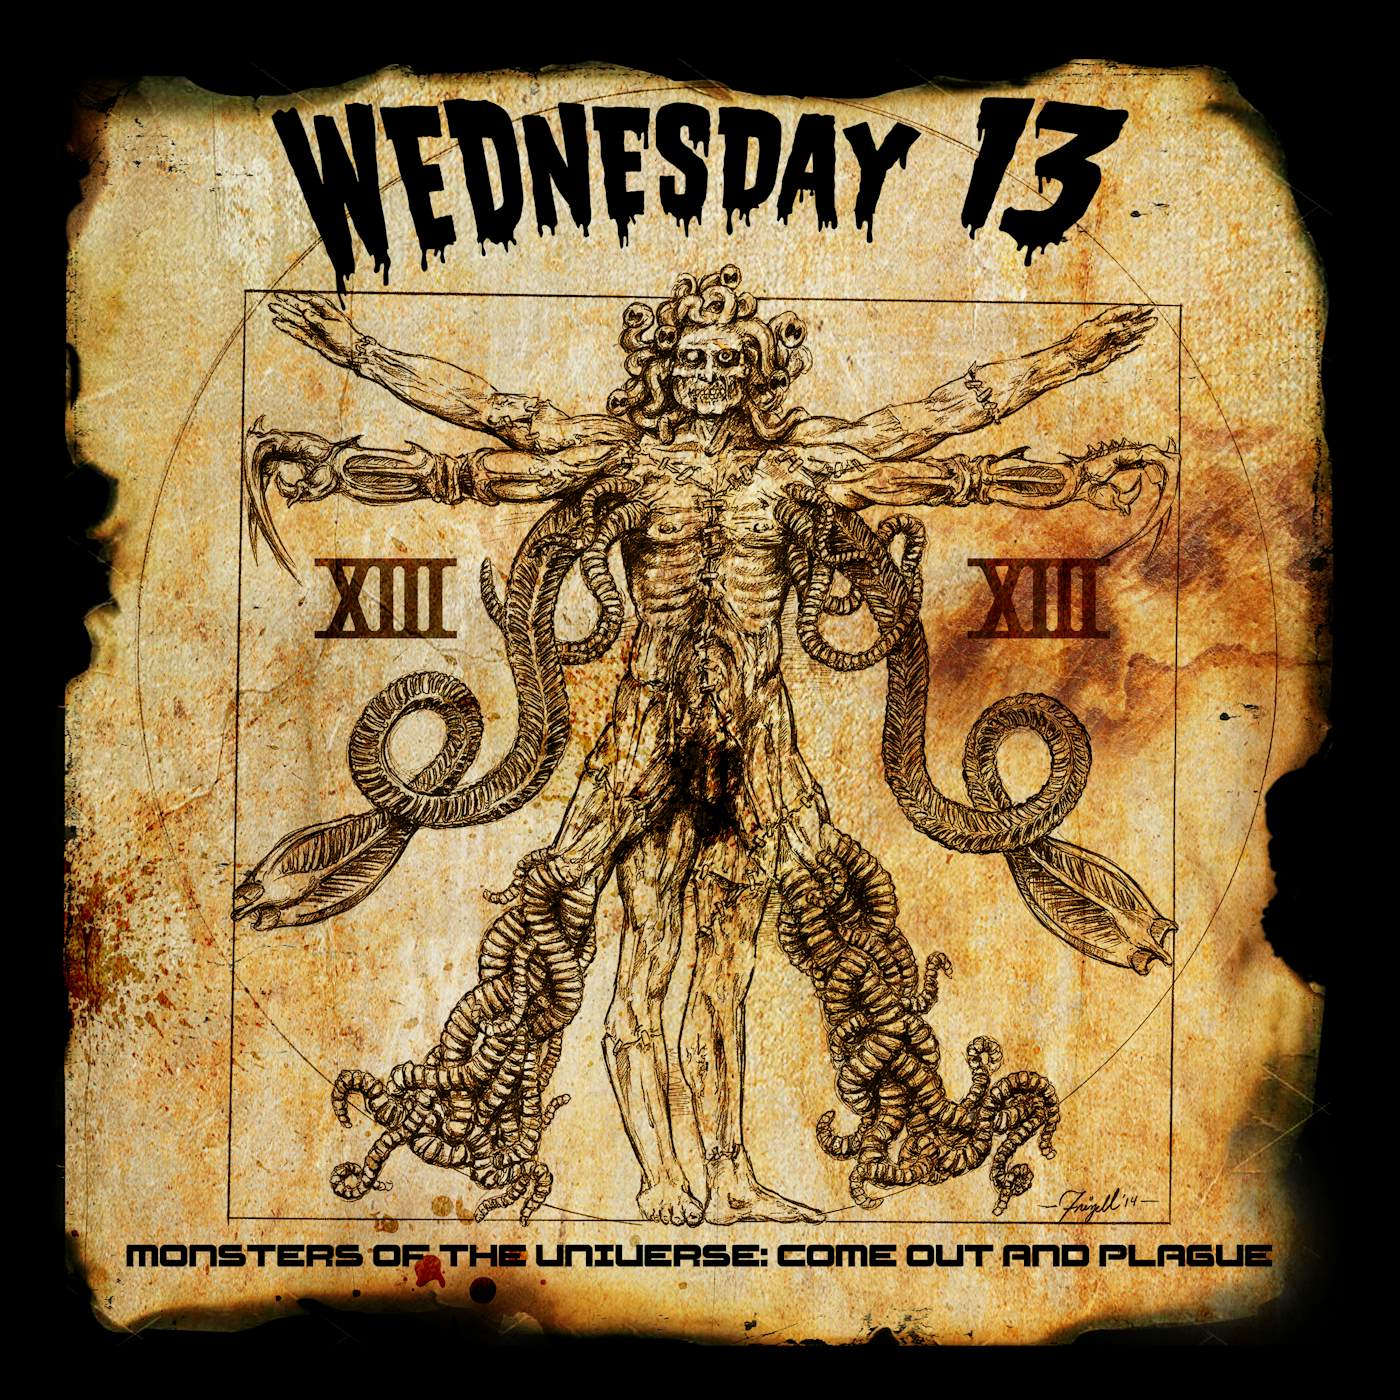 Wednesday 13 Monsters of the Universe: Come Out and Plague Vinyl Record